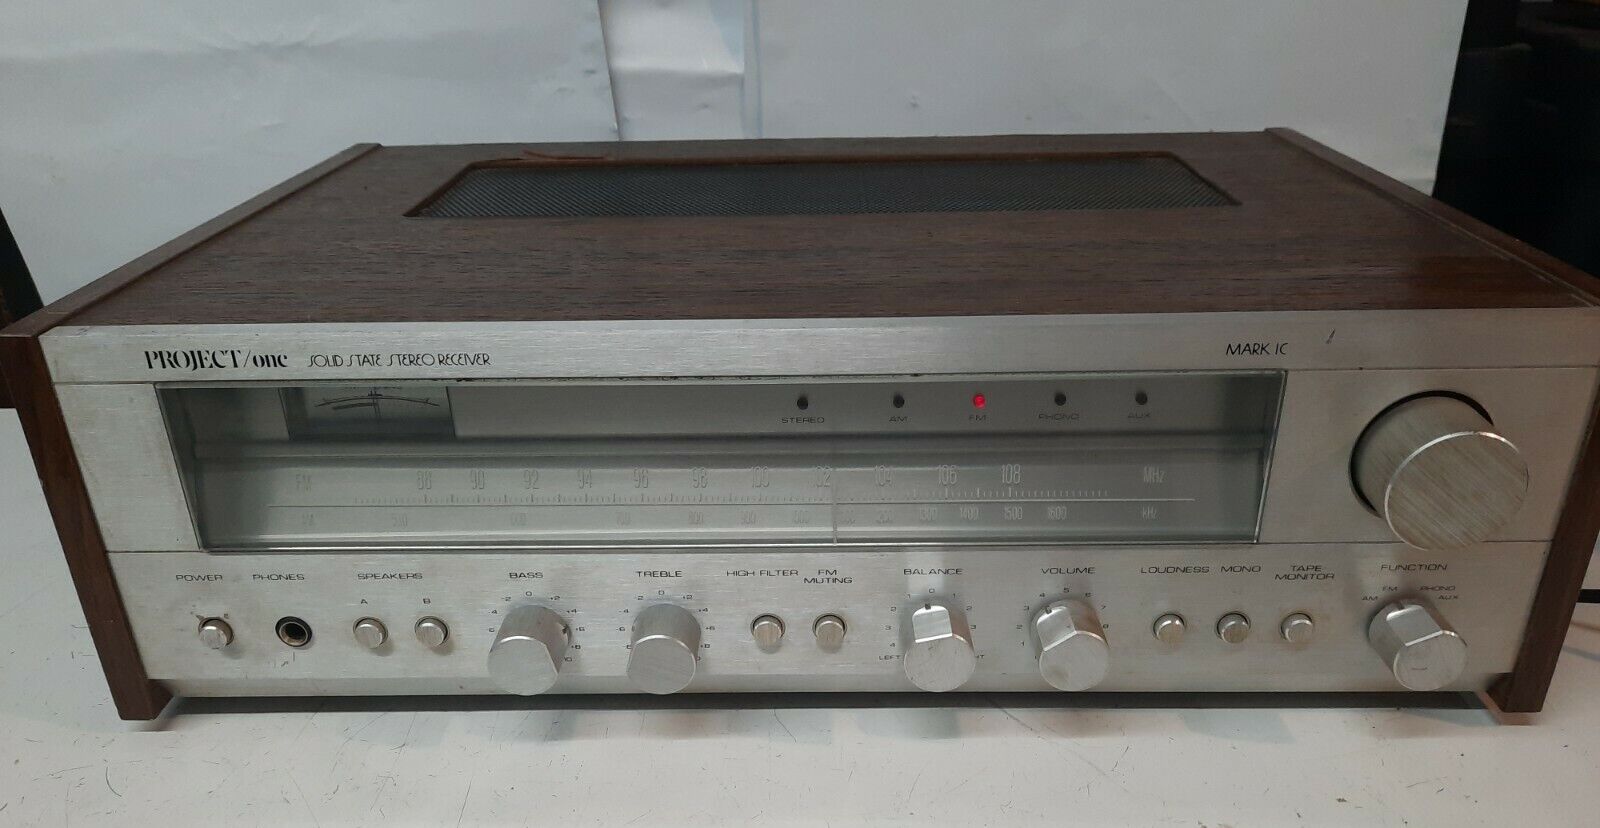 Project/One Solid State Stereo Receiver Mark IC Good Working Condition 